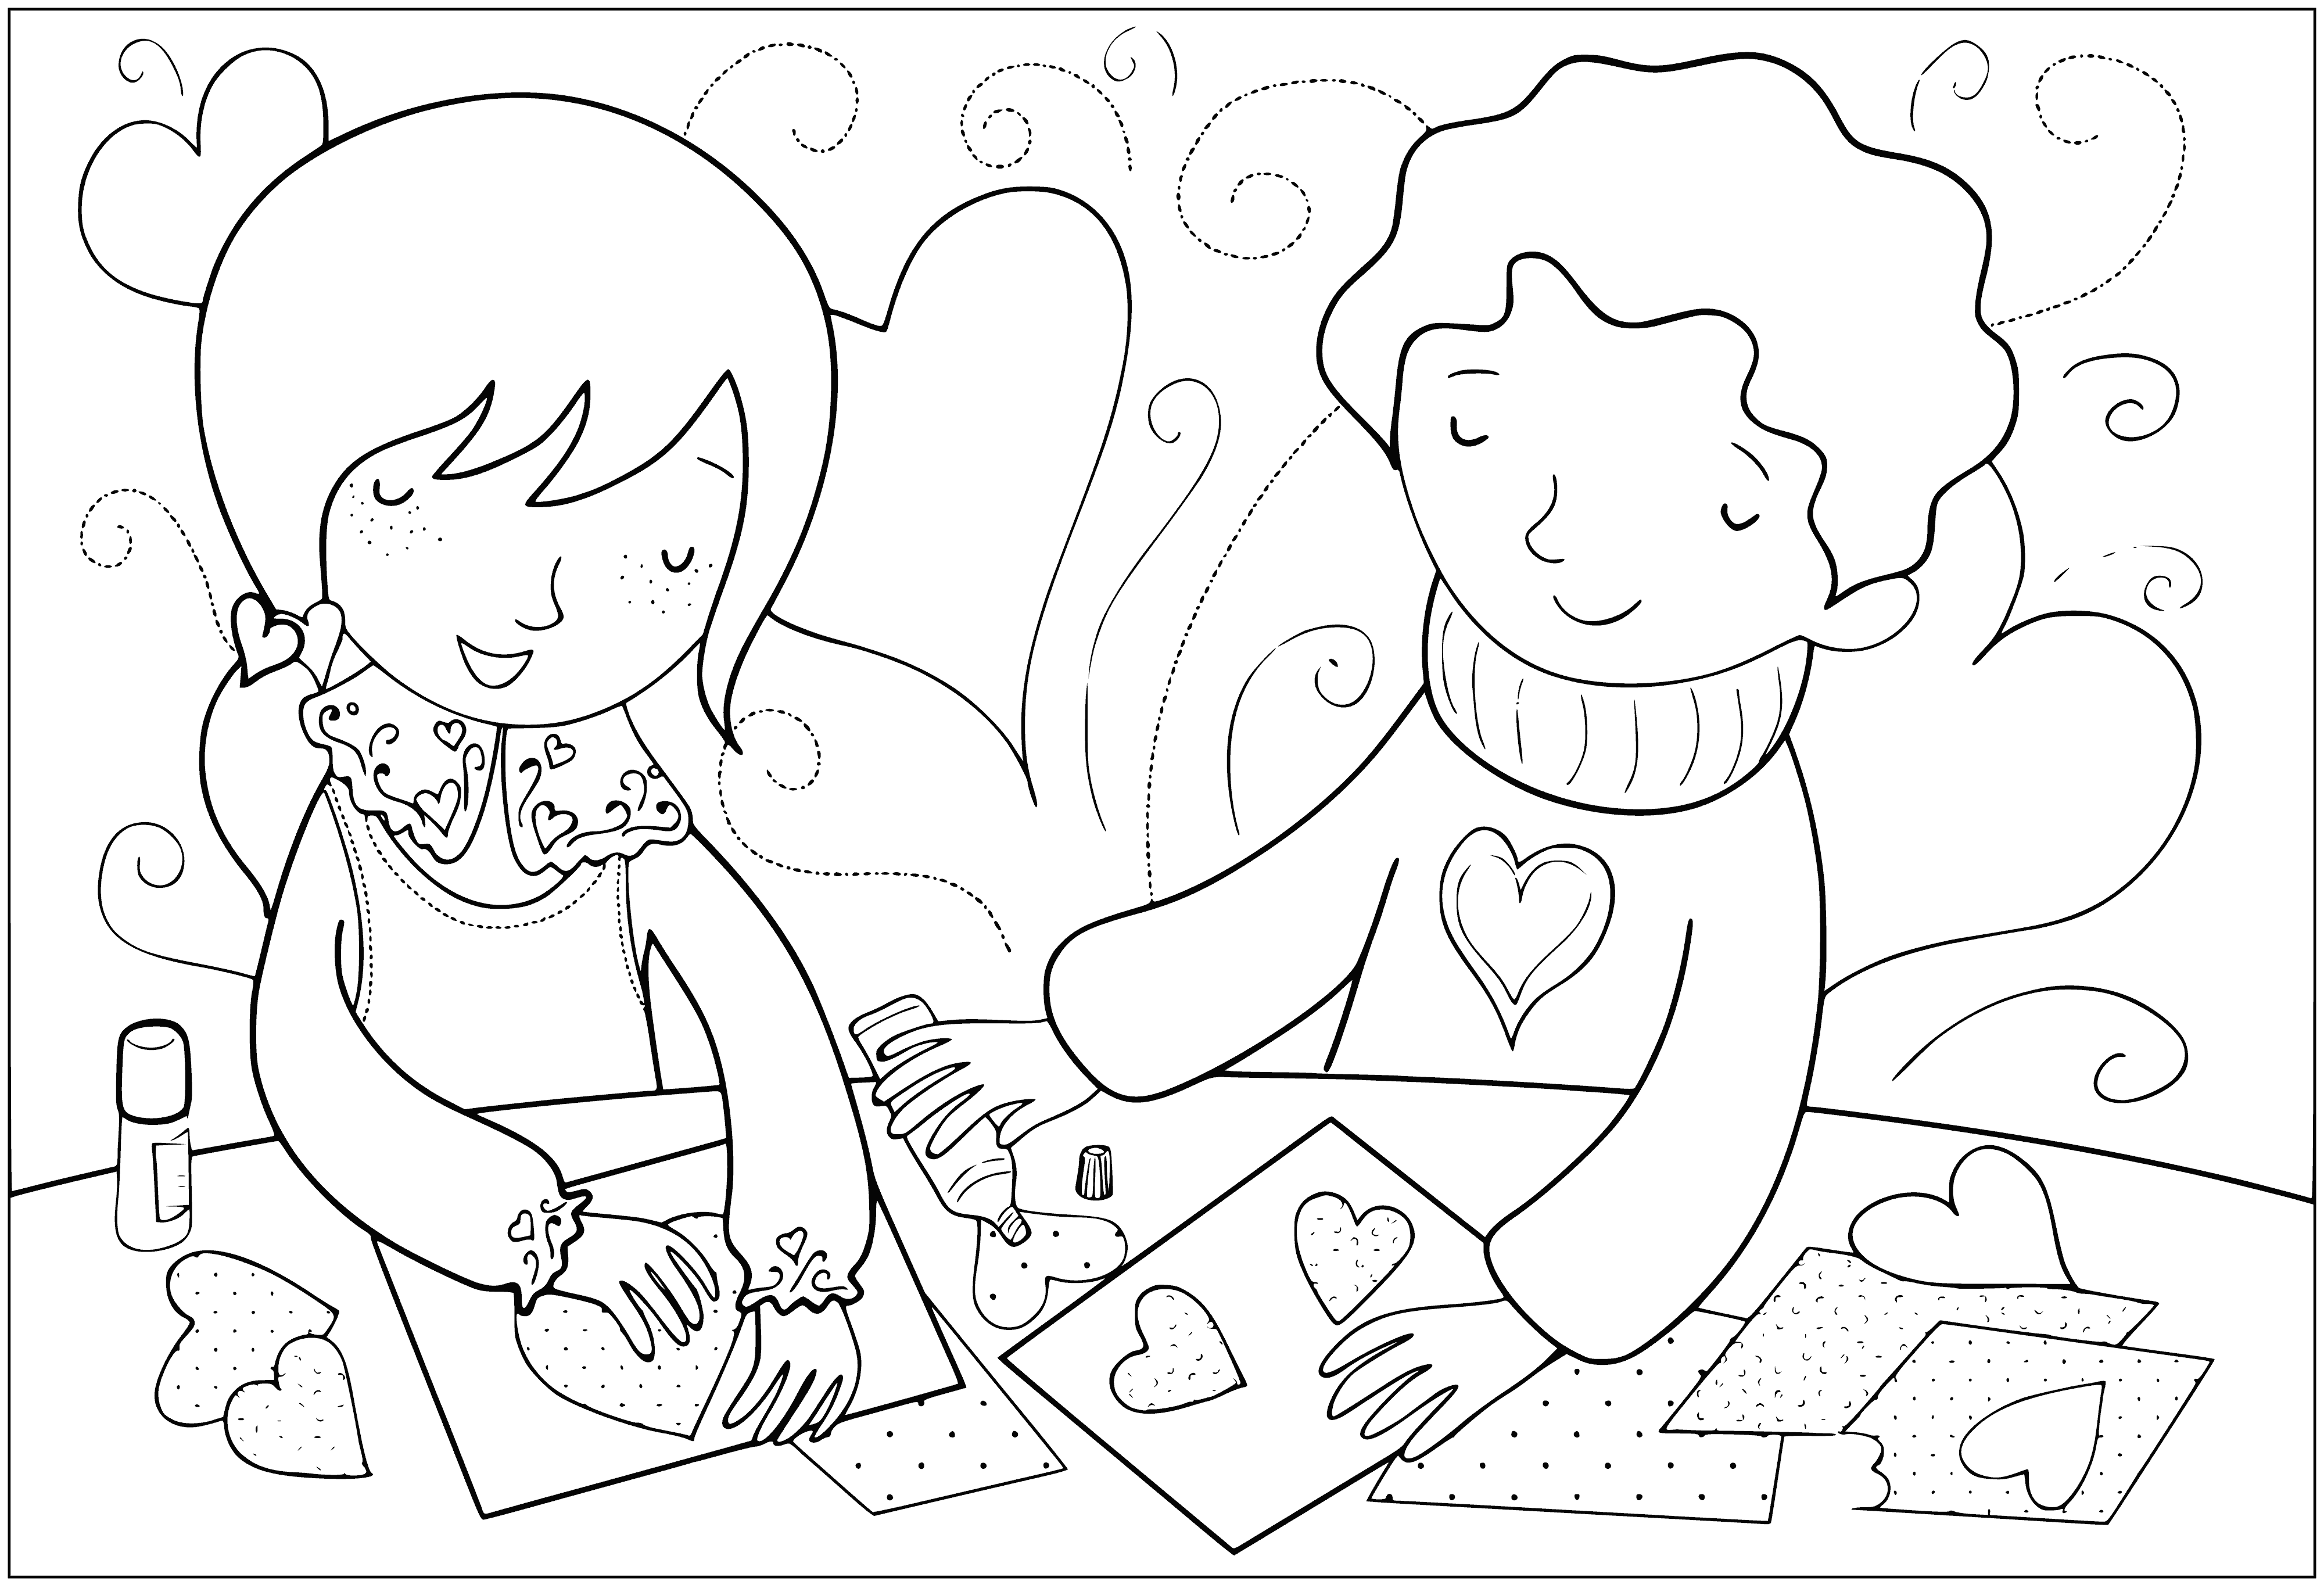 coloring page: Kids make valentines w/ paper, scissors, glue & various colors. Finished valentines dot the page in the coloring page.